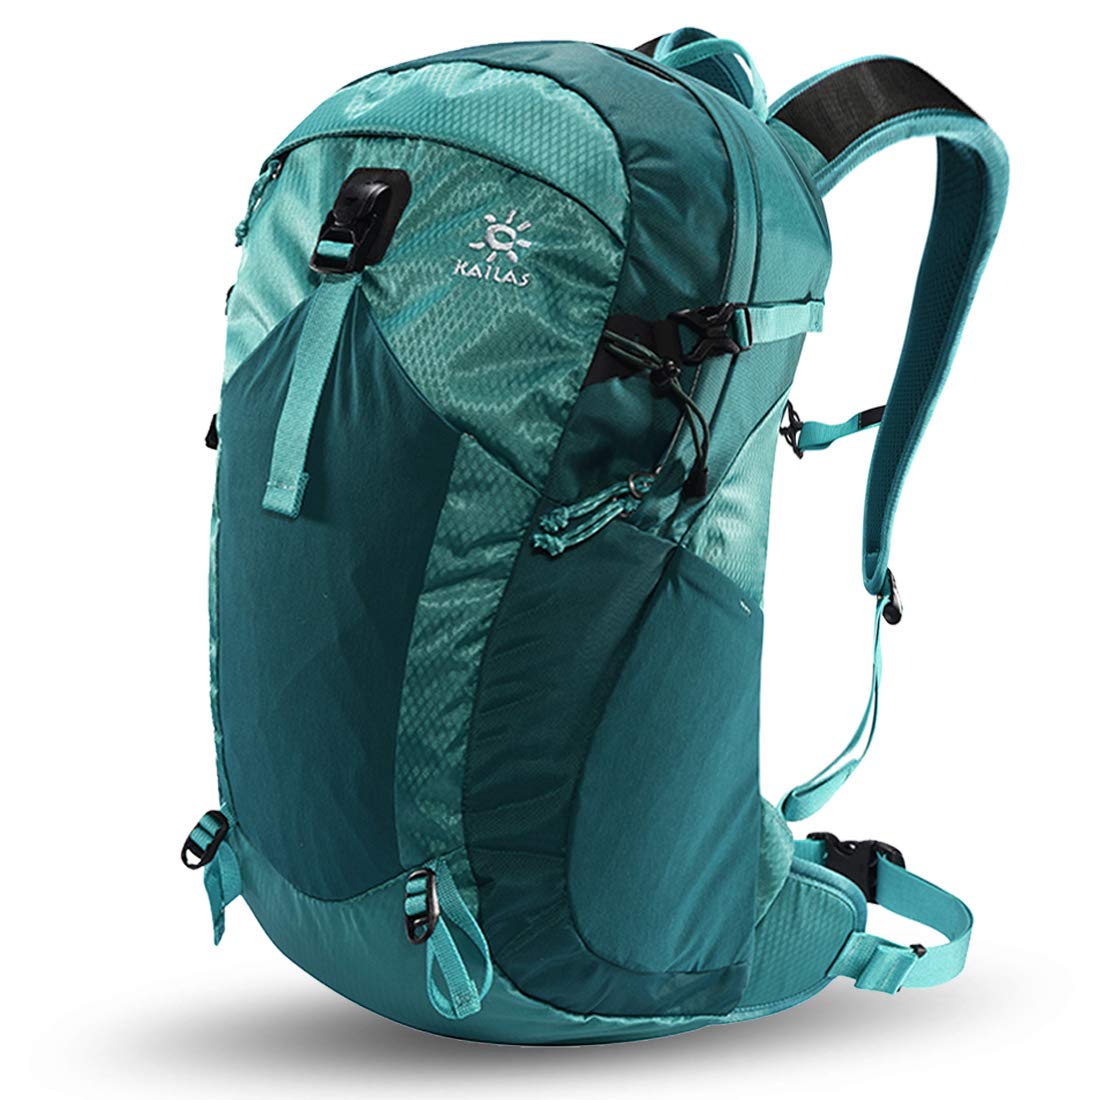 KAILAS 20L Hiking Backpack for Women Men Lightweight Backpacks Waterproof Small Daypack Camping Outdoor Trekking Travel Green